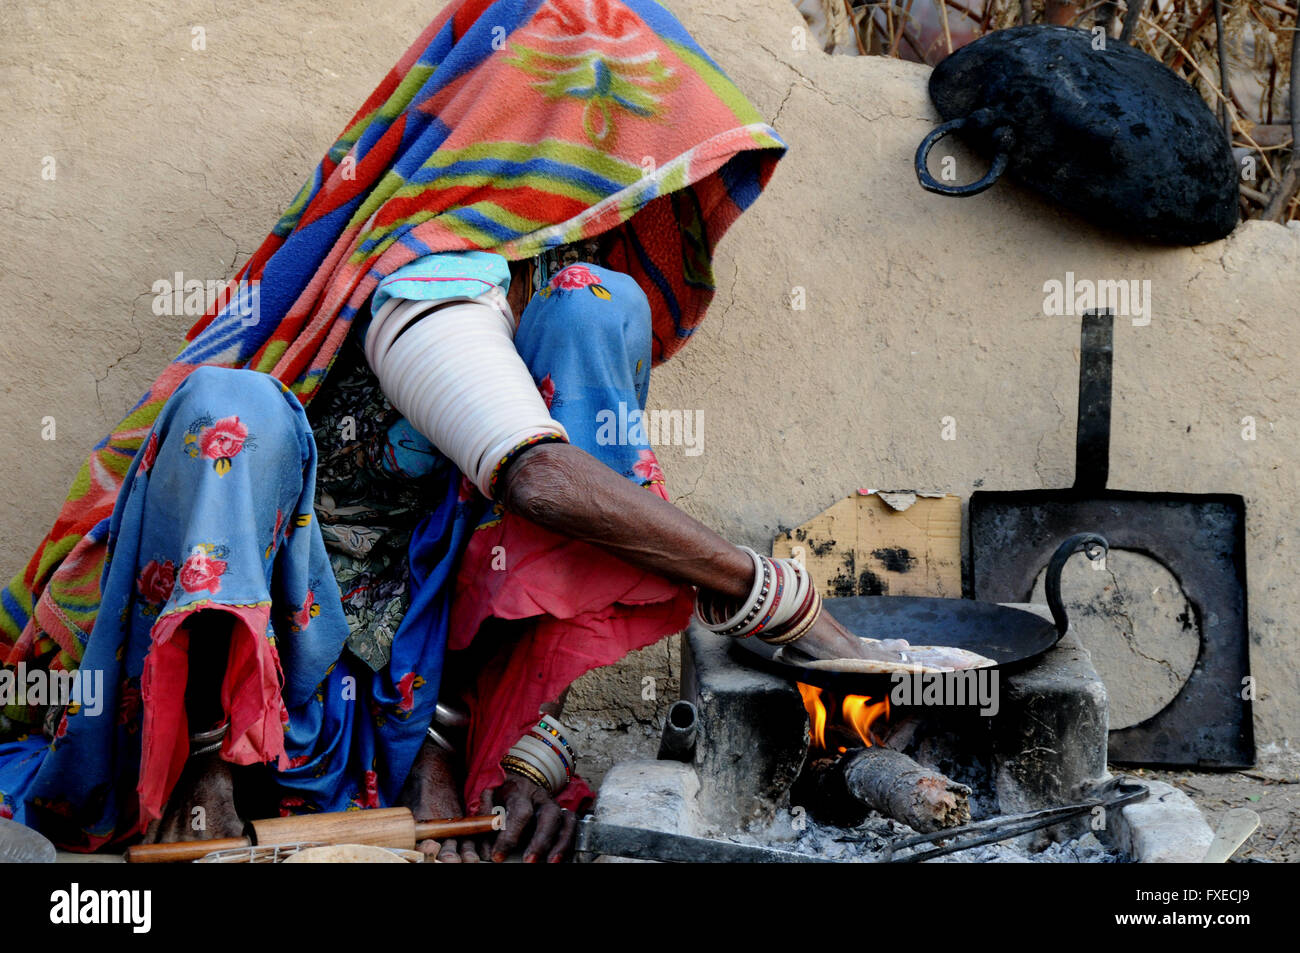 A woman sits making her early morning breakfast chapatis in a village near the northern Indian town of Jojawar. Stock Photo